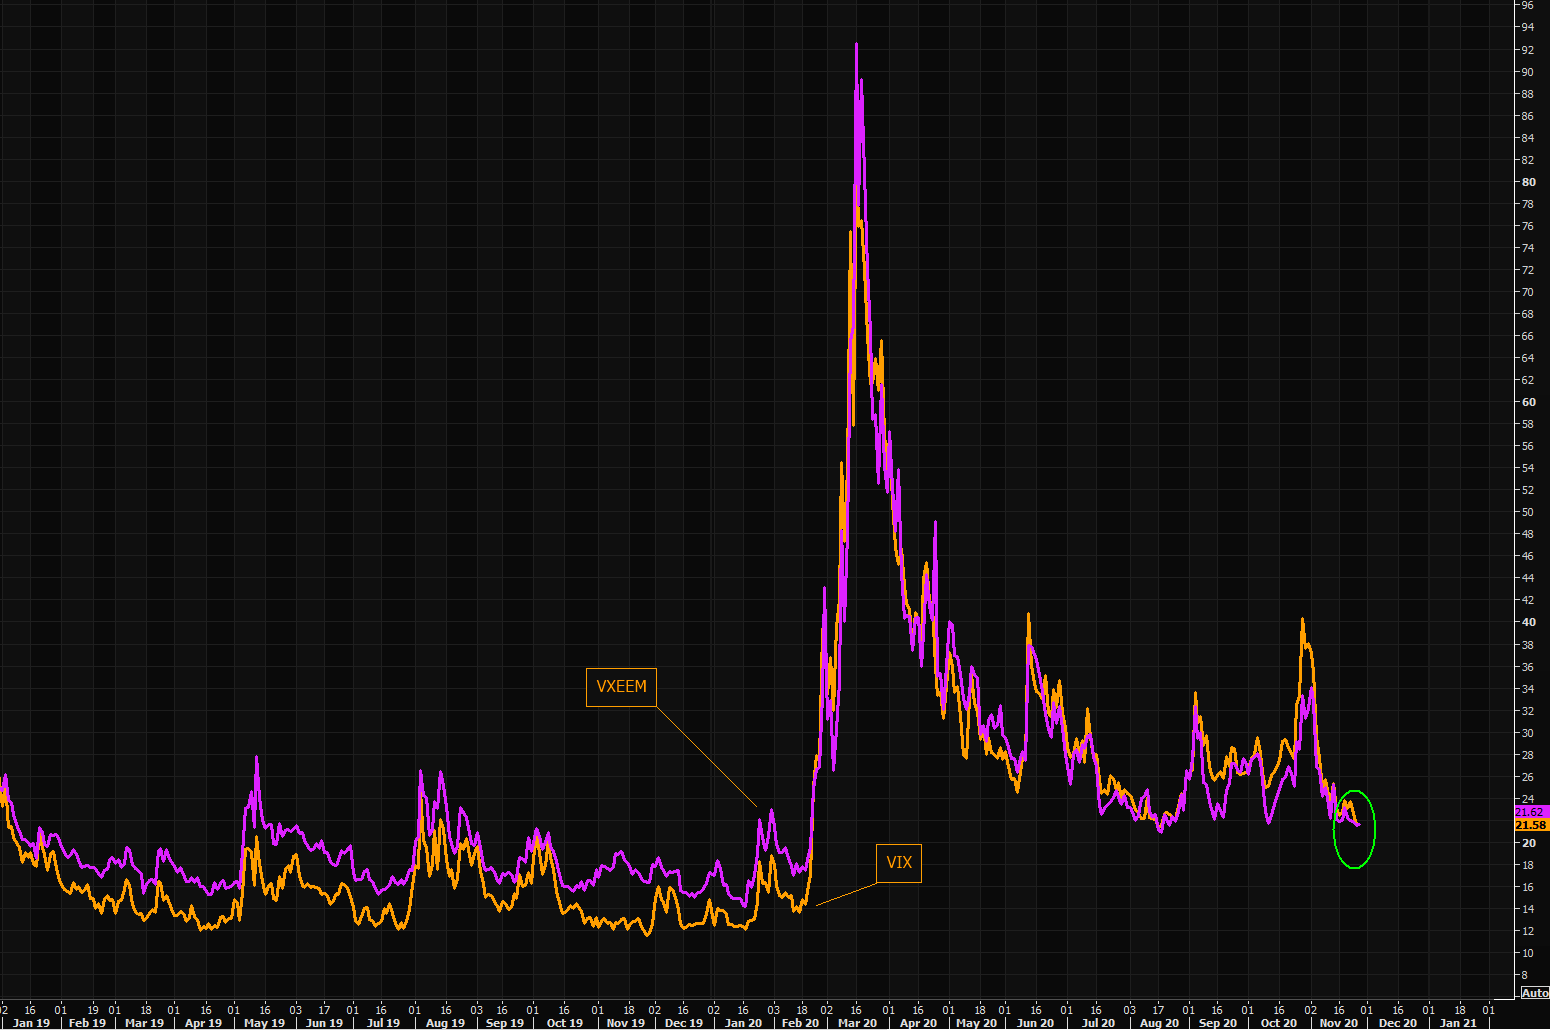 At least some things are normal - VIX trading below VXEEM